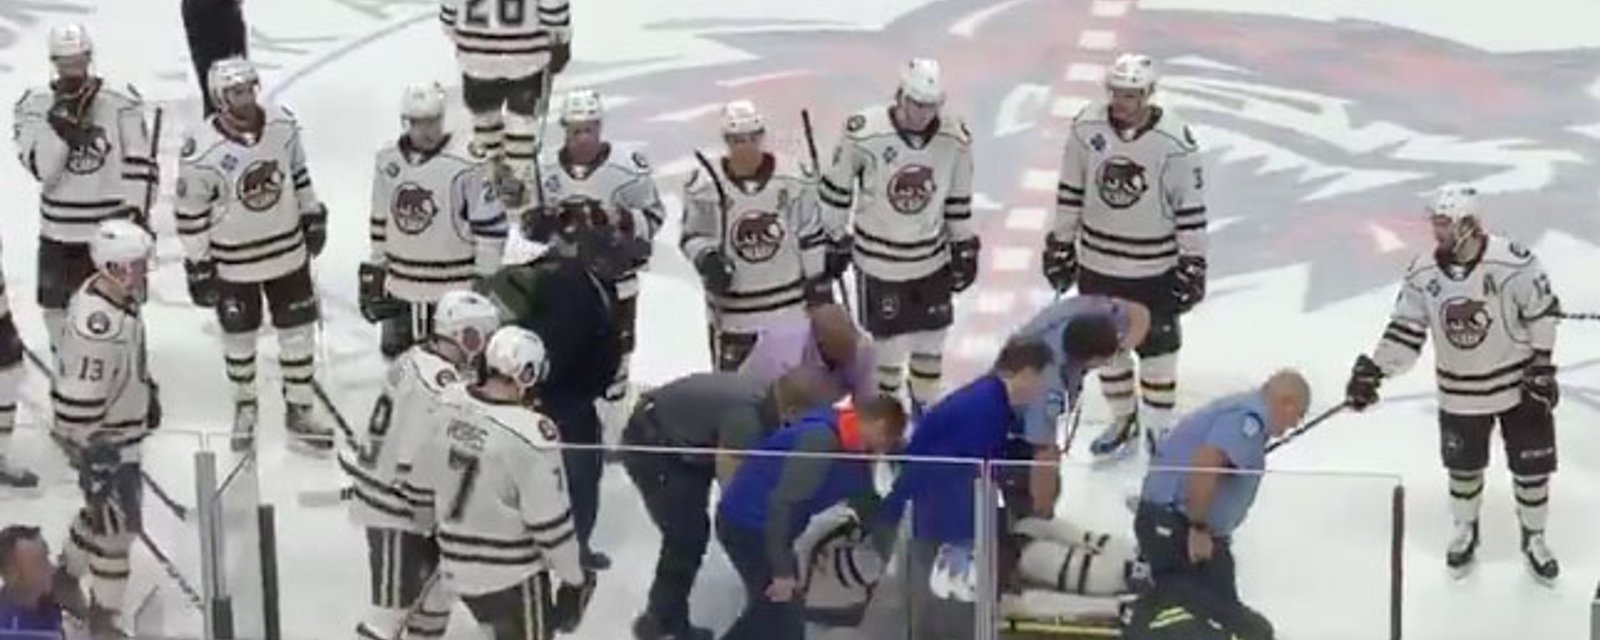 Breaking: Update provided on AHL player who couldn’t move after scary crash into boards